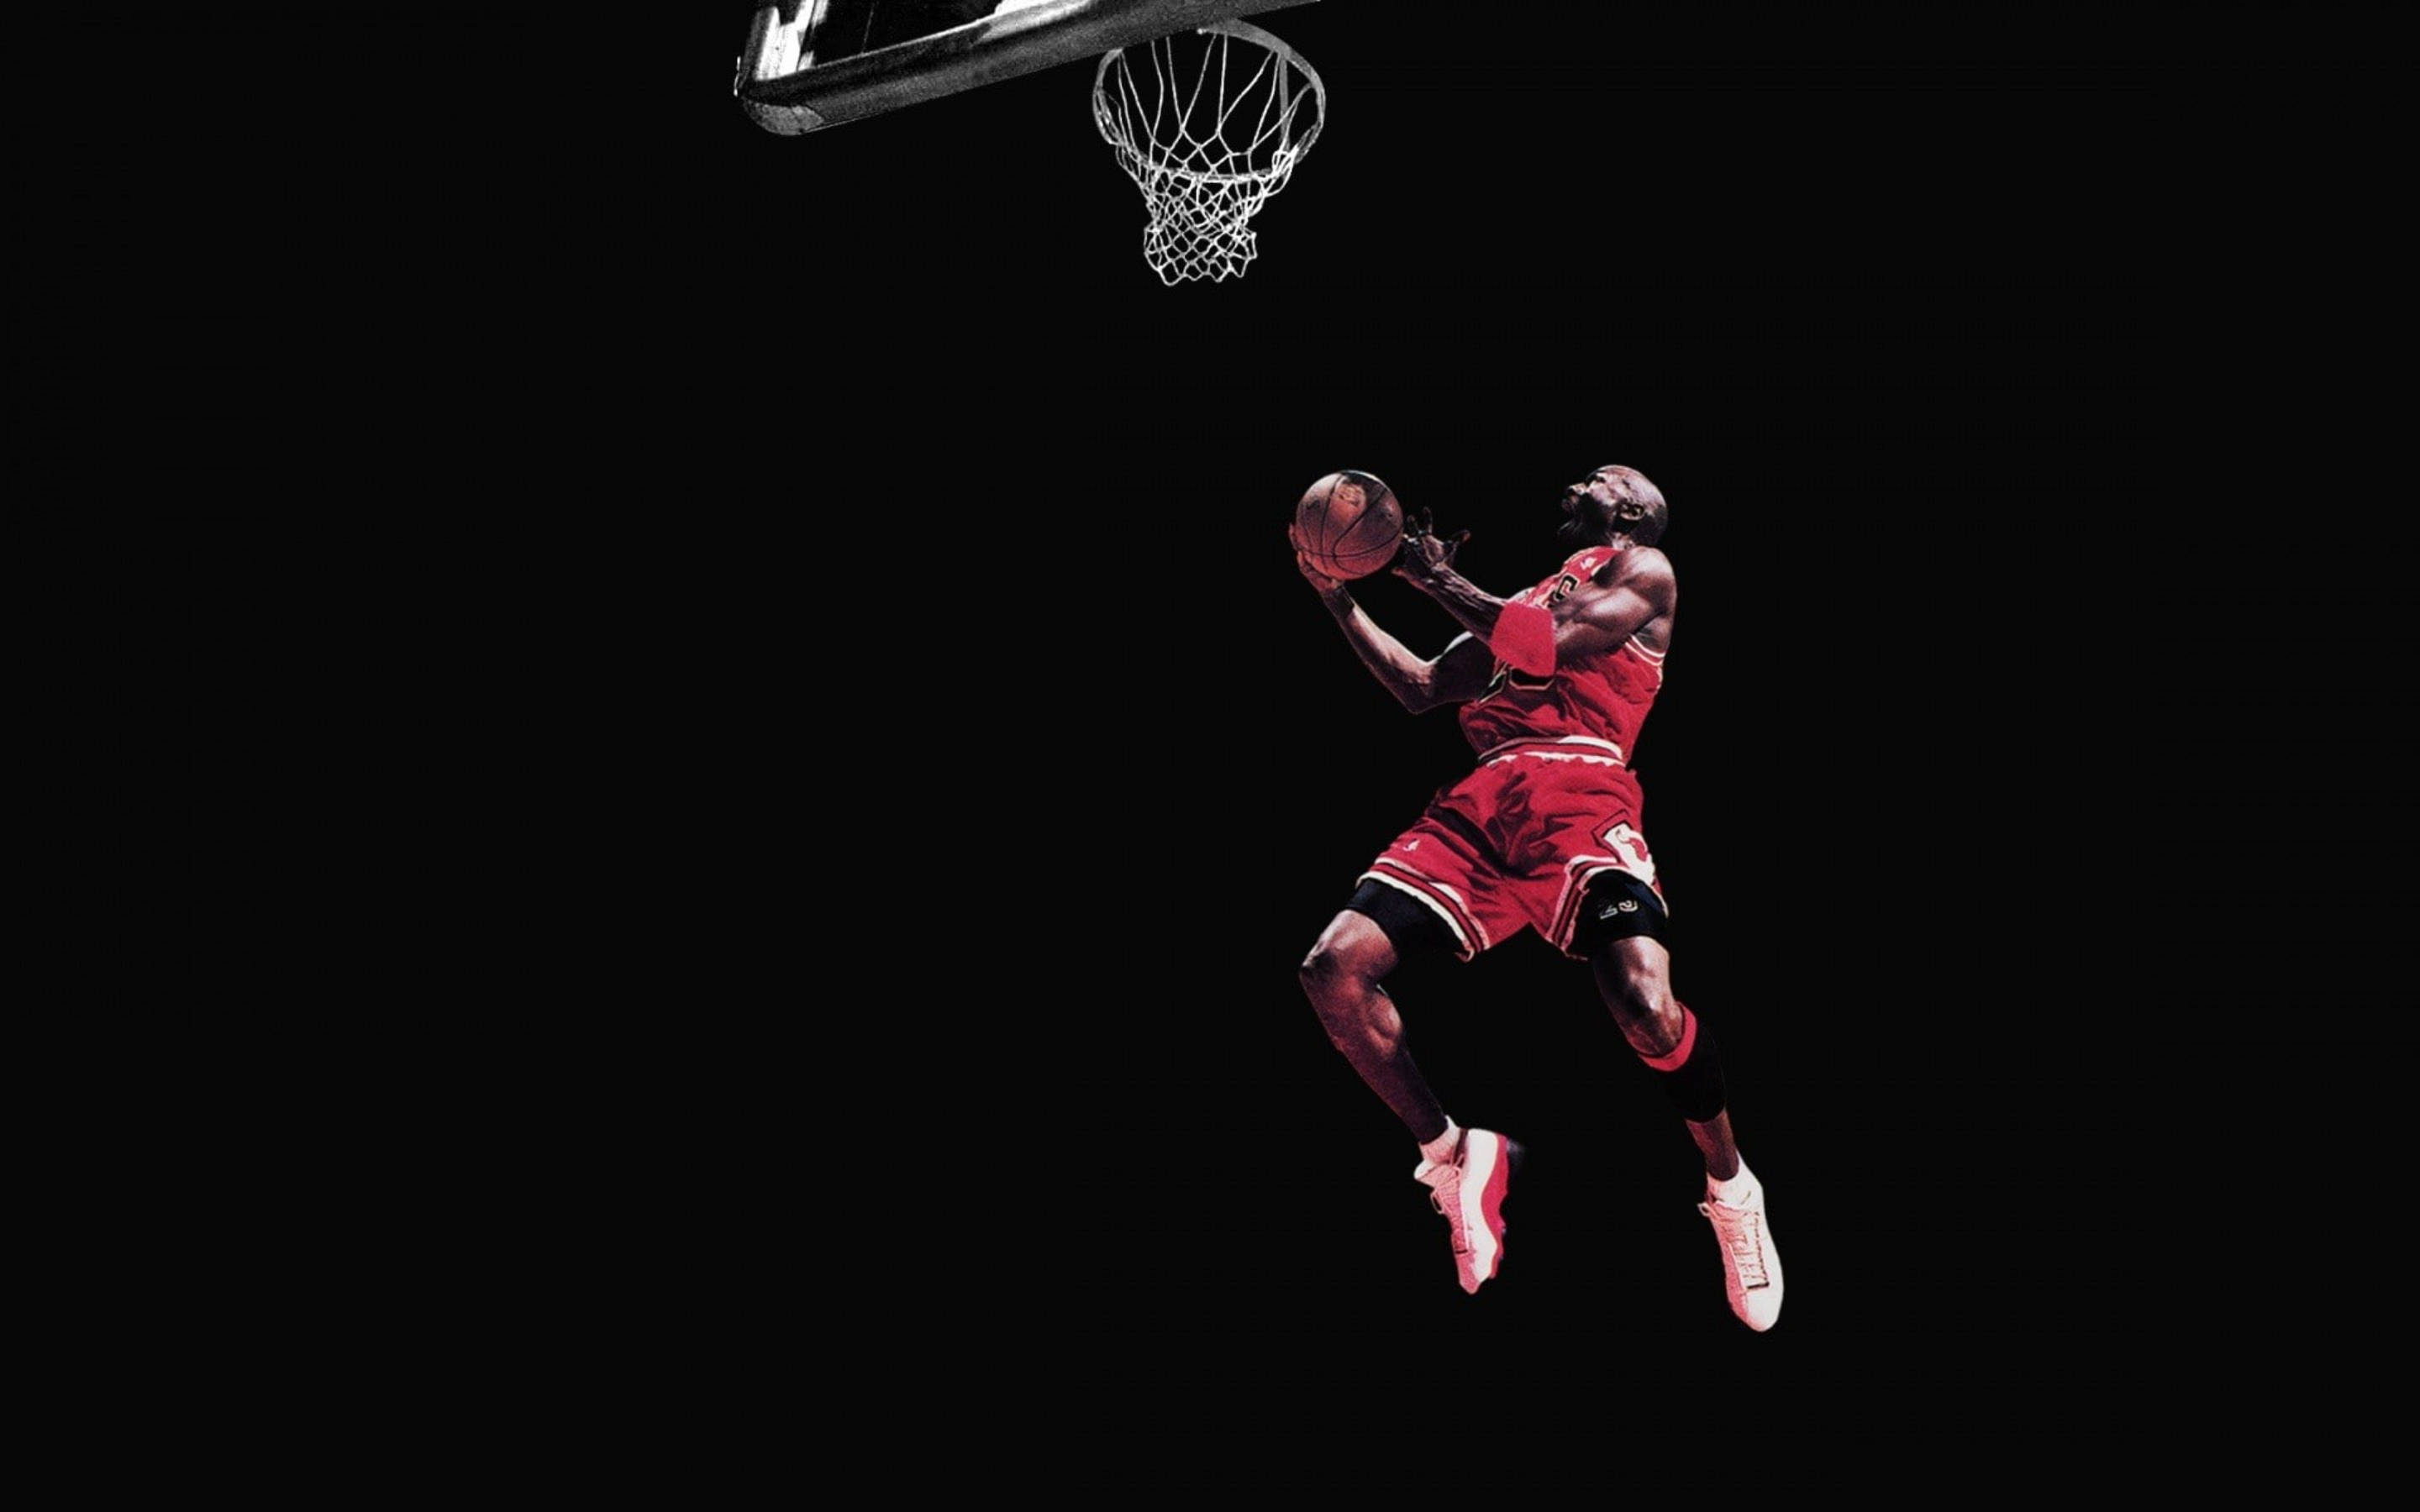 Cool Jordan In Mid-air Moment Background